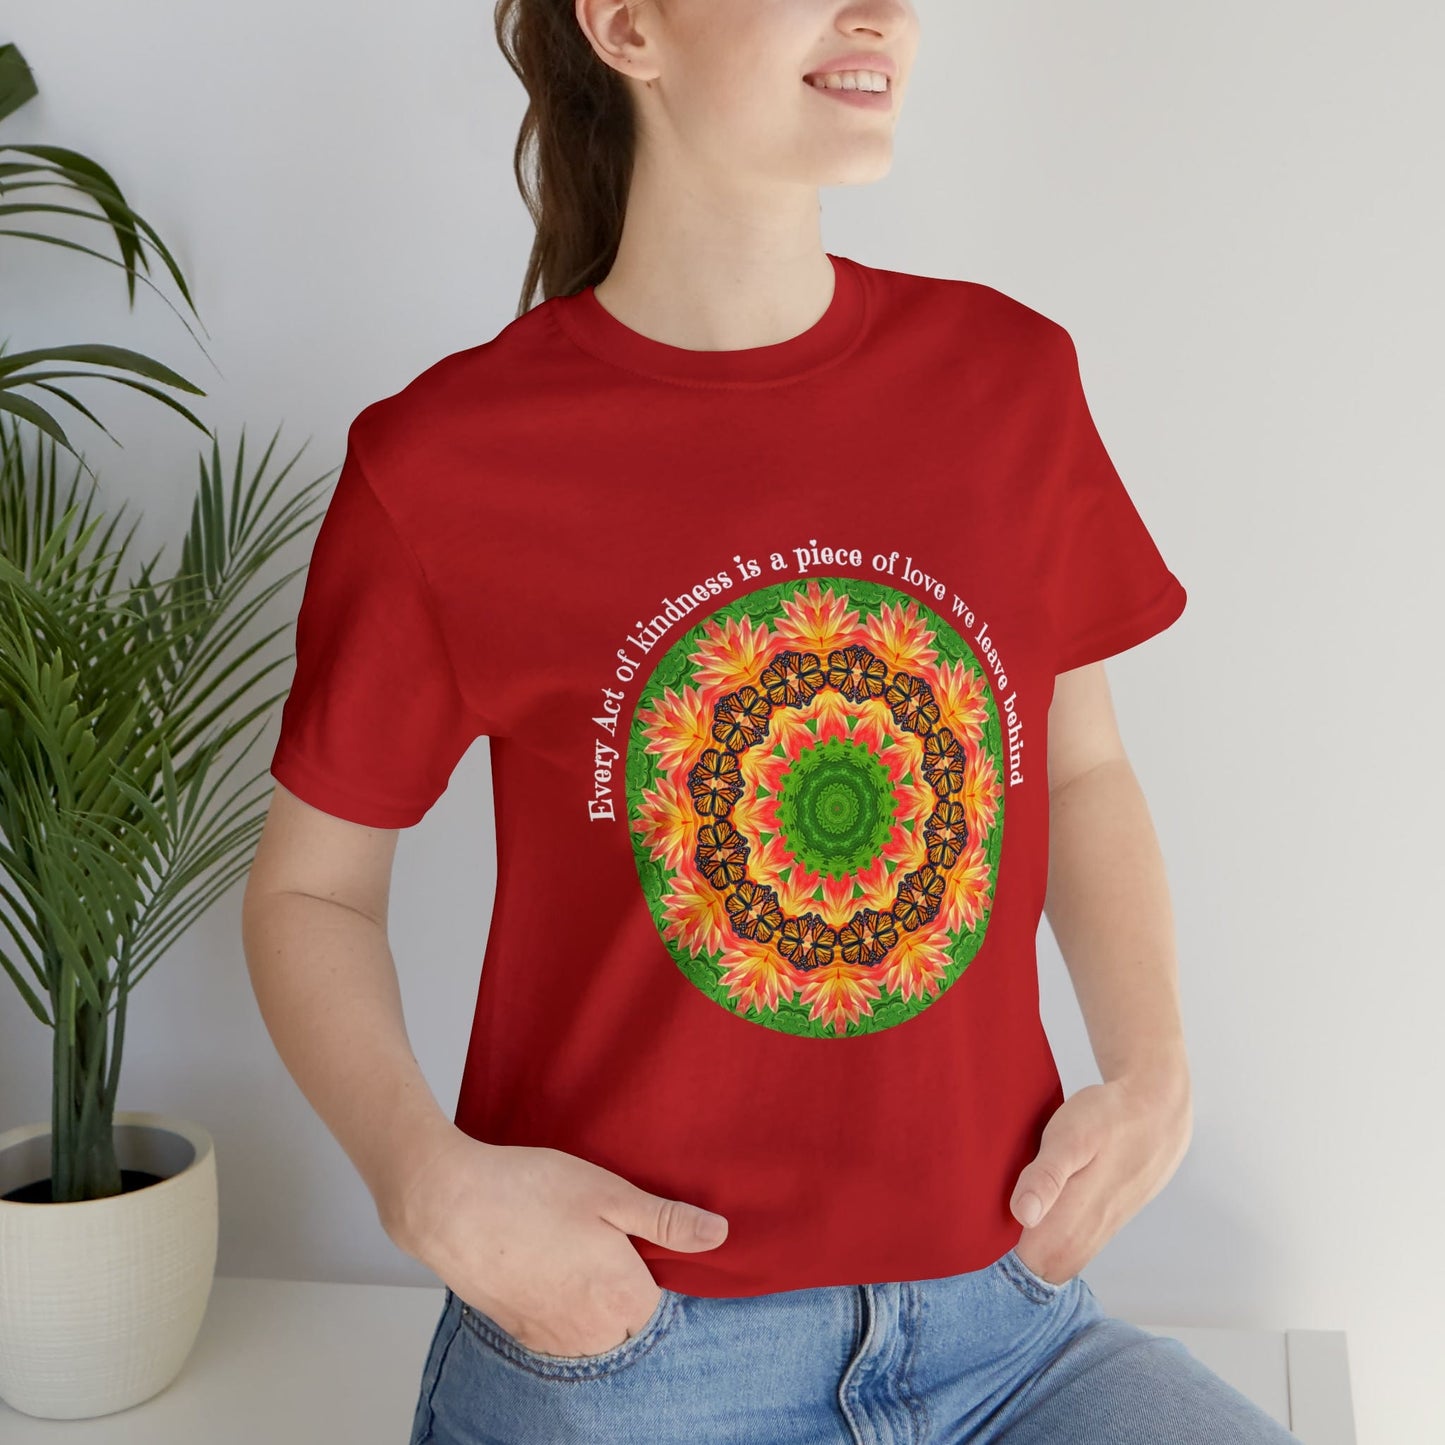 Beautiful Butterfly Mandala Art Graphic Tee Shirt - Cottagecore Clothing A Nature Lovers Delight Ornate Orbit red